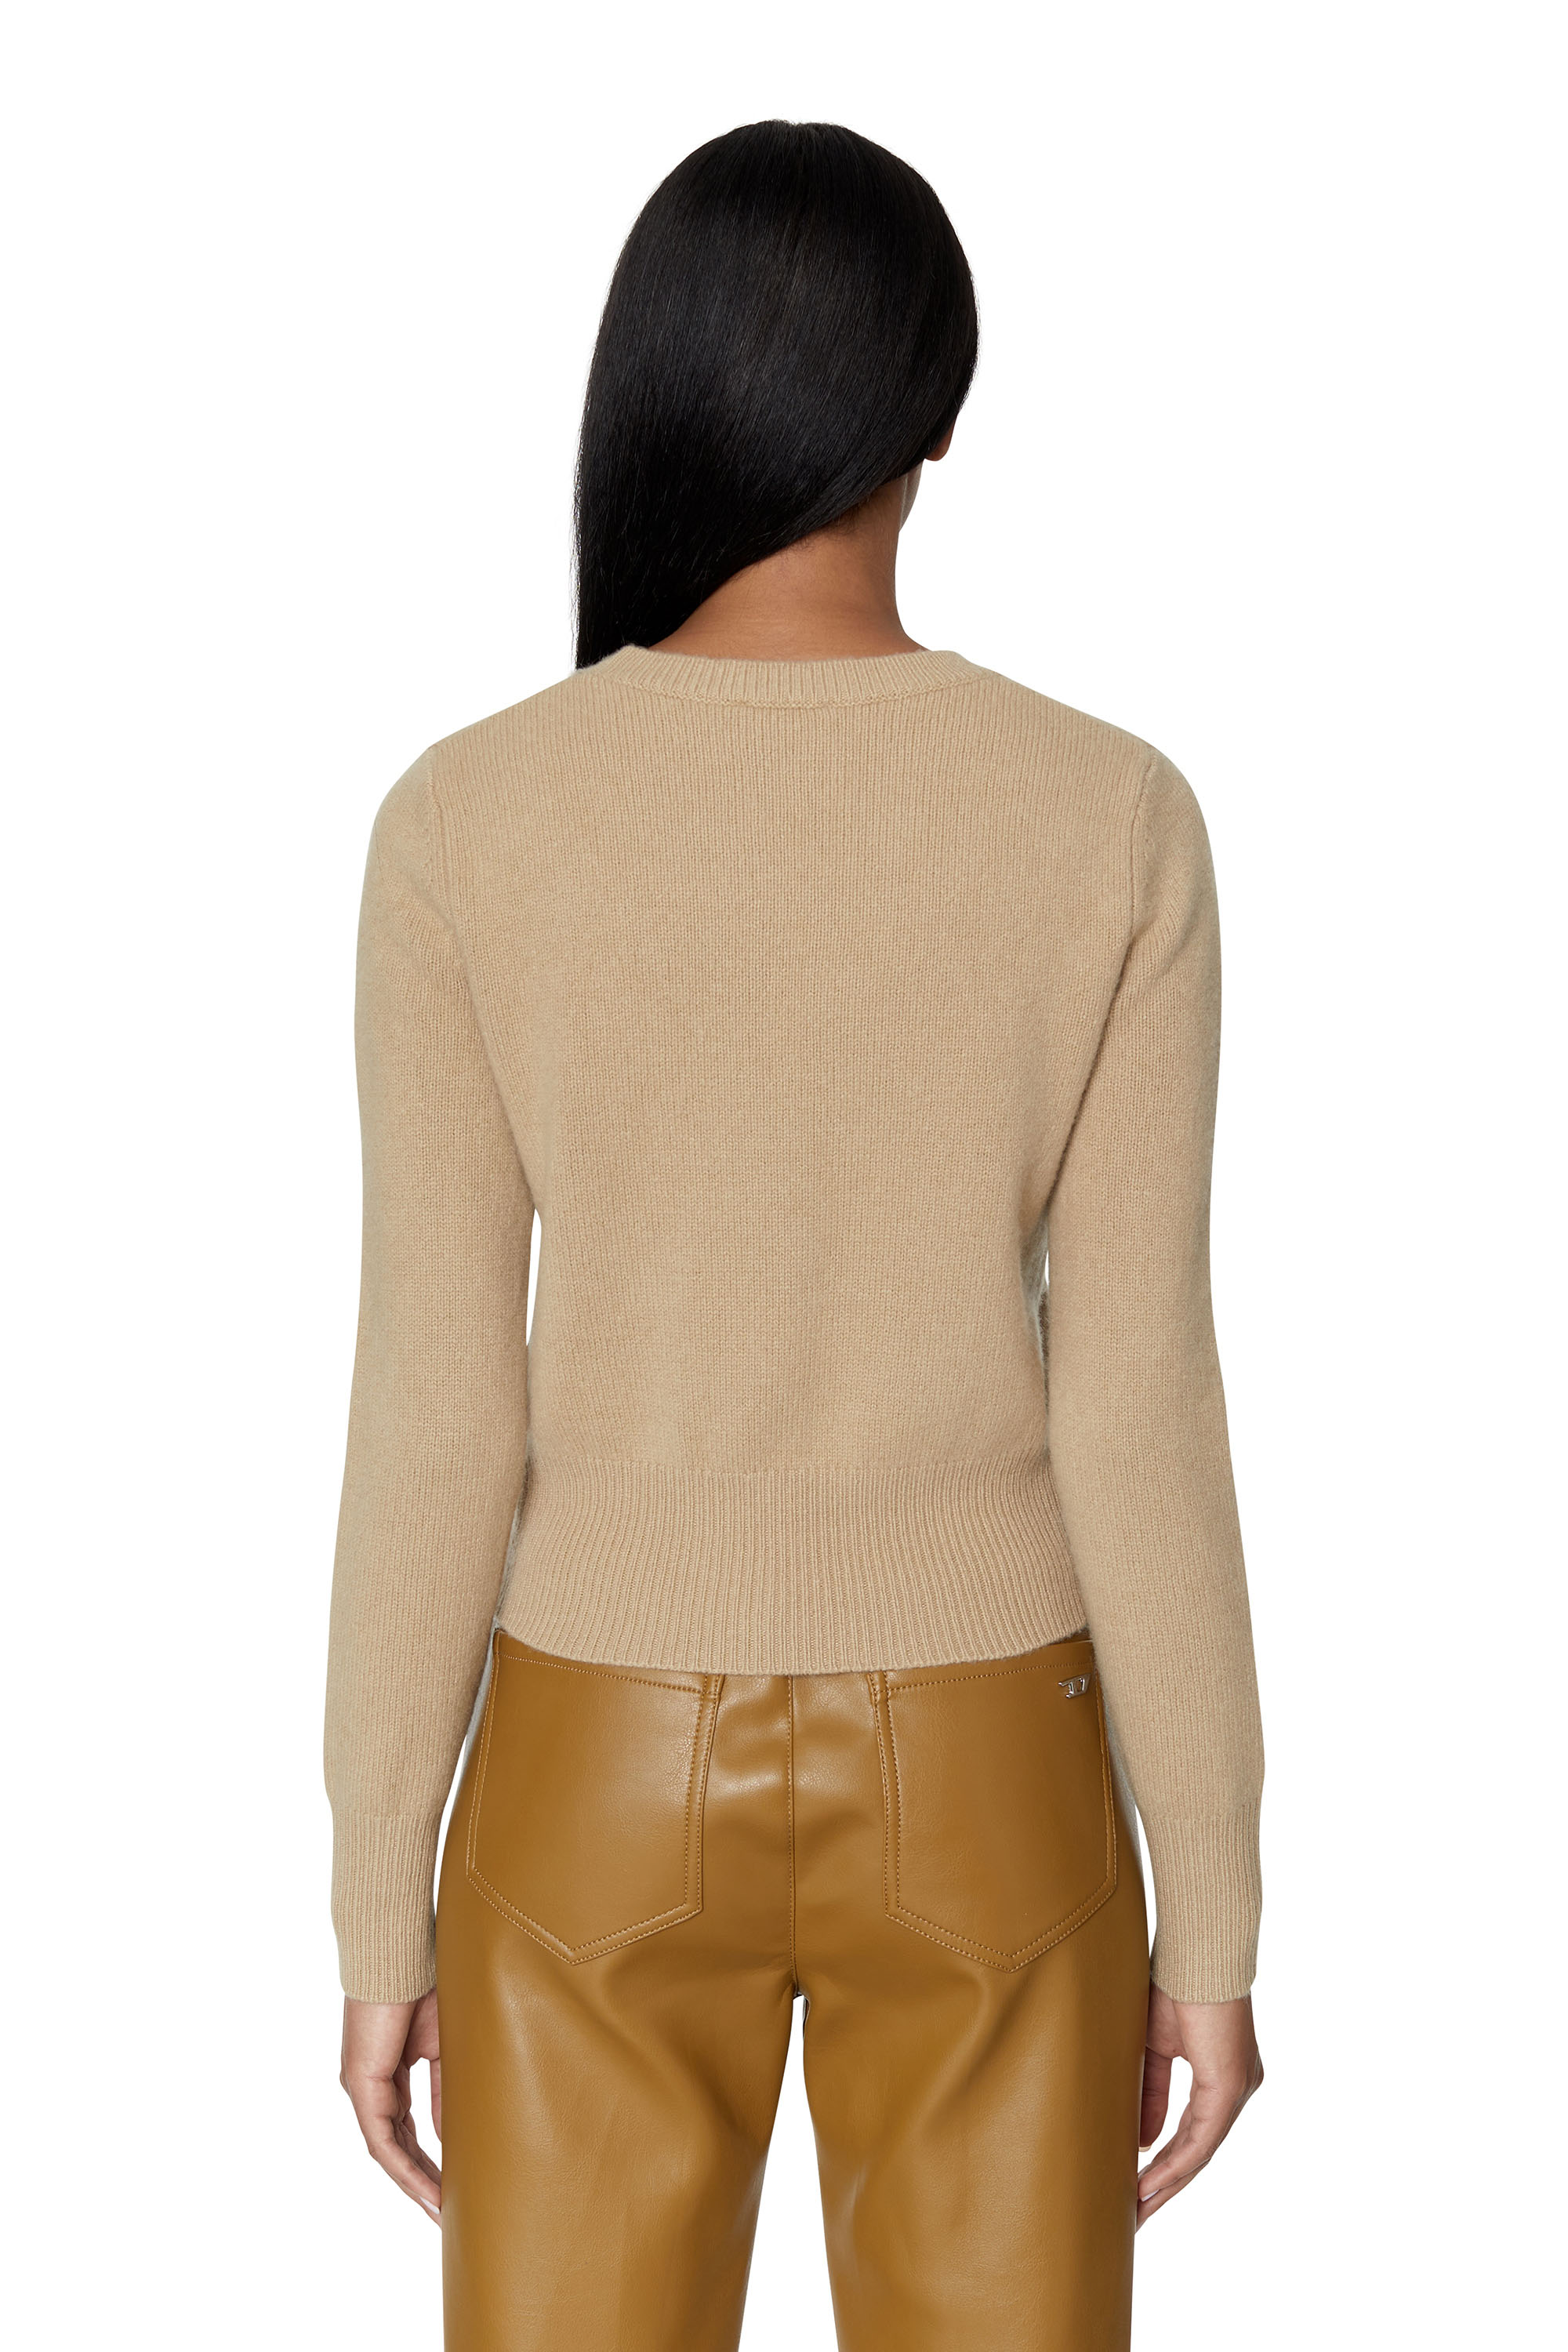 Diesel - M-AREESA, Woman Jumper with embroidered cut-out logo in Beige - Image 3